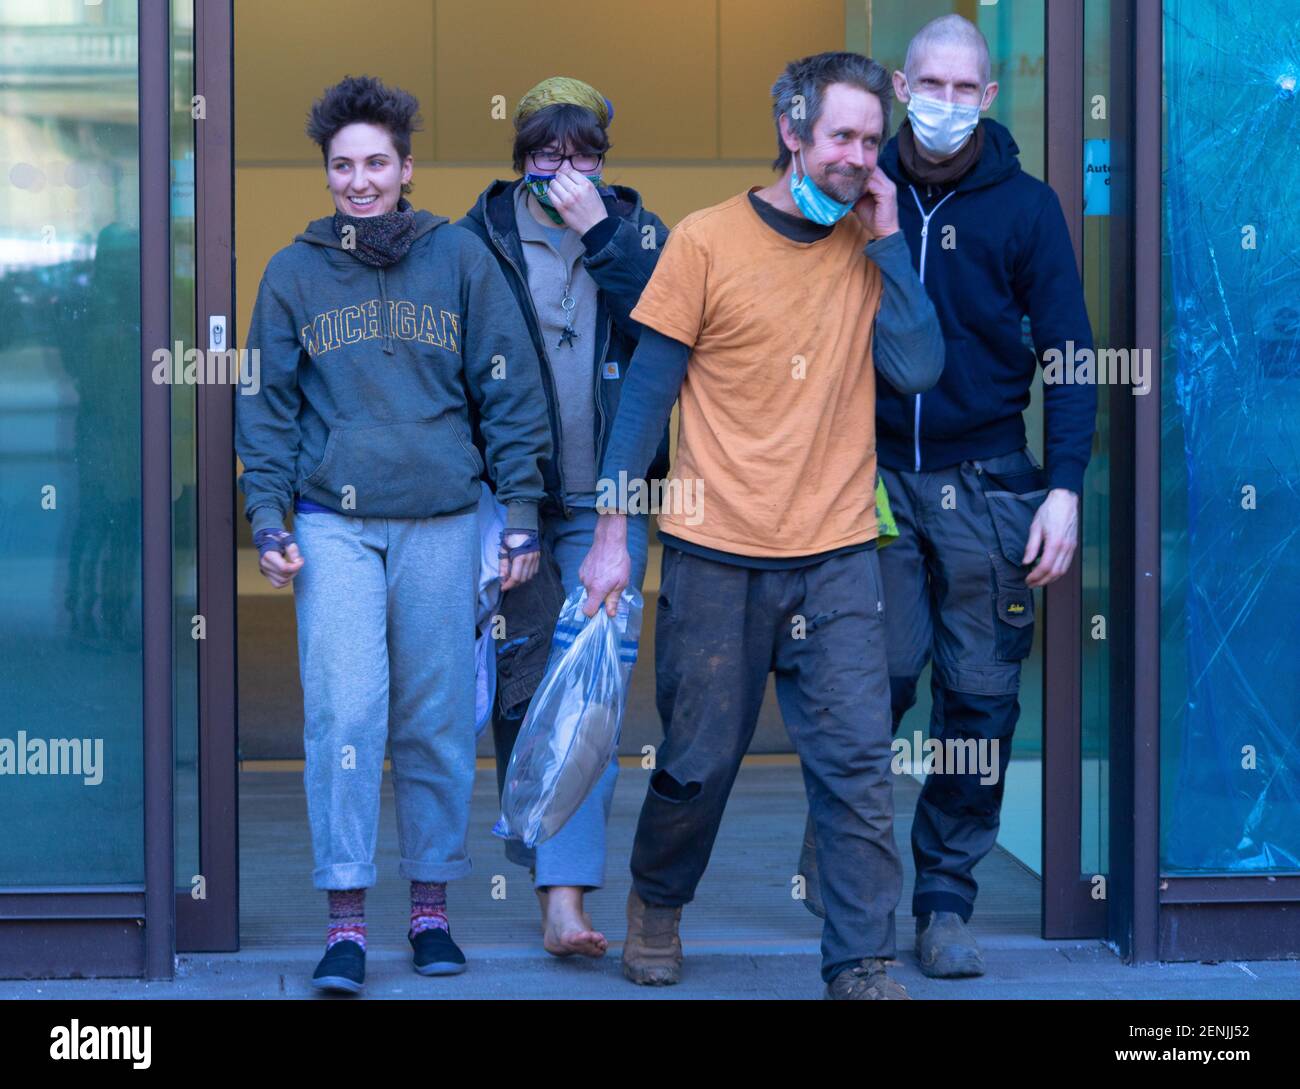 London, UK, 26th February 2021. Anti HS2 protestors and Euston tunnellers Dan Hooper, known as Swampy, Blue and Nemo leave Westminster Magistrates Court. The three protestors were evicted from the tunnel yesterday morning at 7am after spending 30 days underground in protest at the HS2 project and the destruction of Euston Square Gardens to create a temporary taxi rank. They celebrate with bubbly and Dr Larch Maxey comes to greet them. Stock Photo